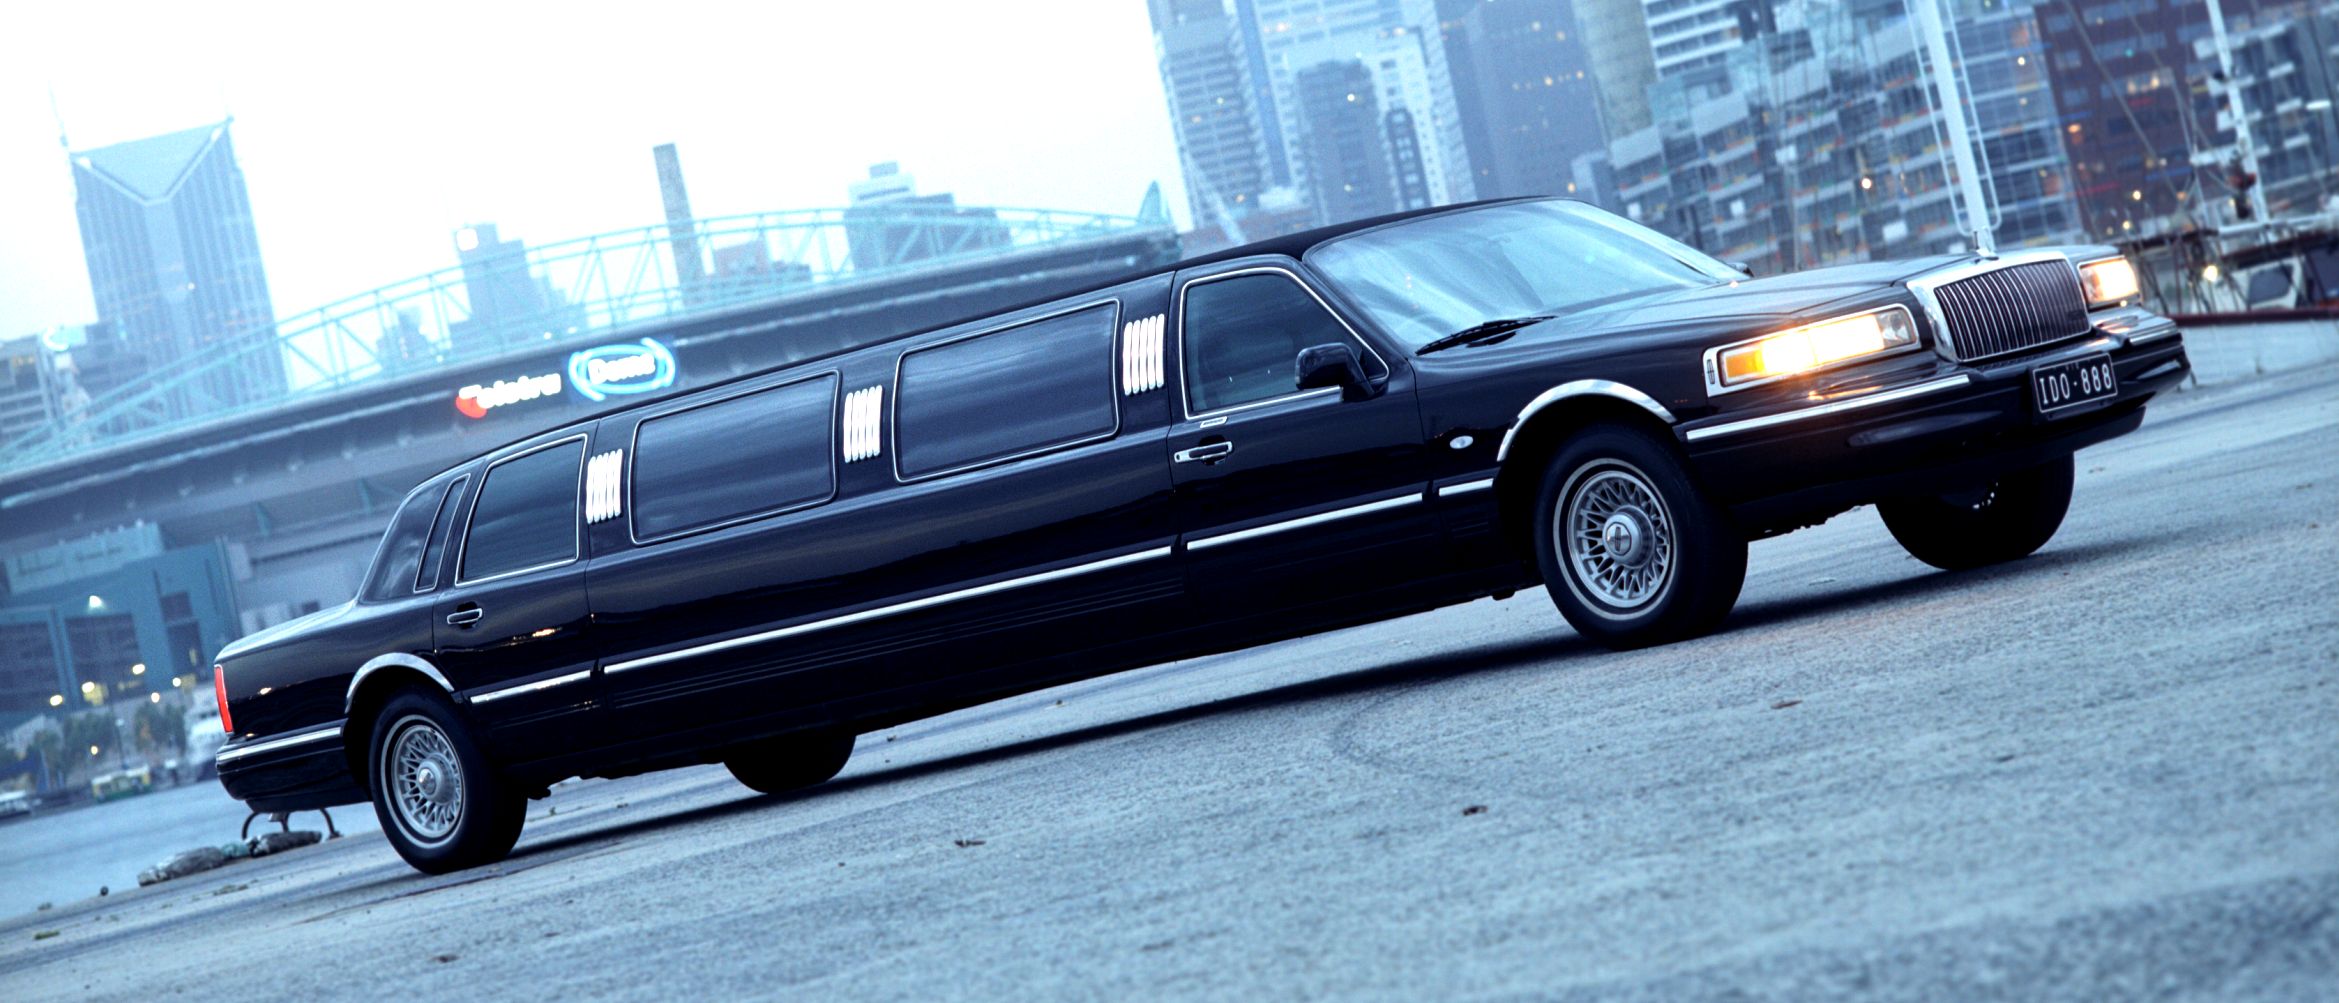 12 Seater chrysler limo hire melbourne